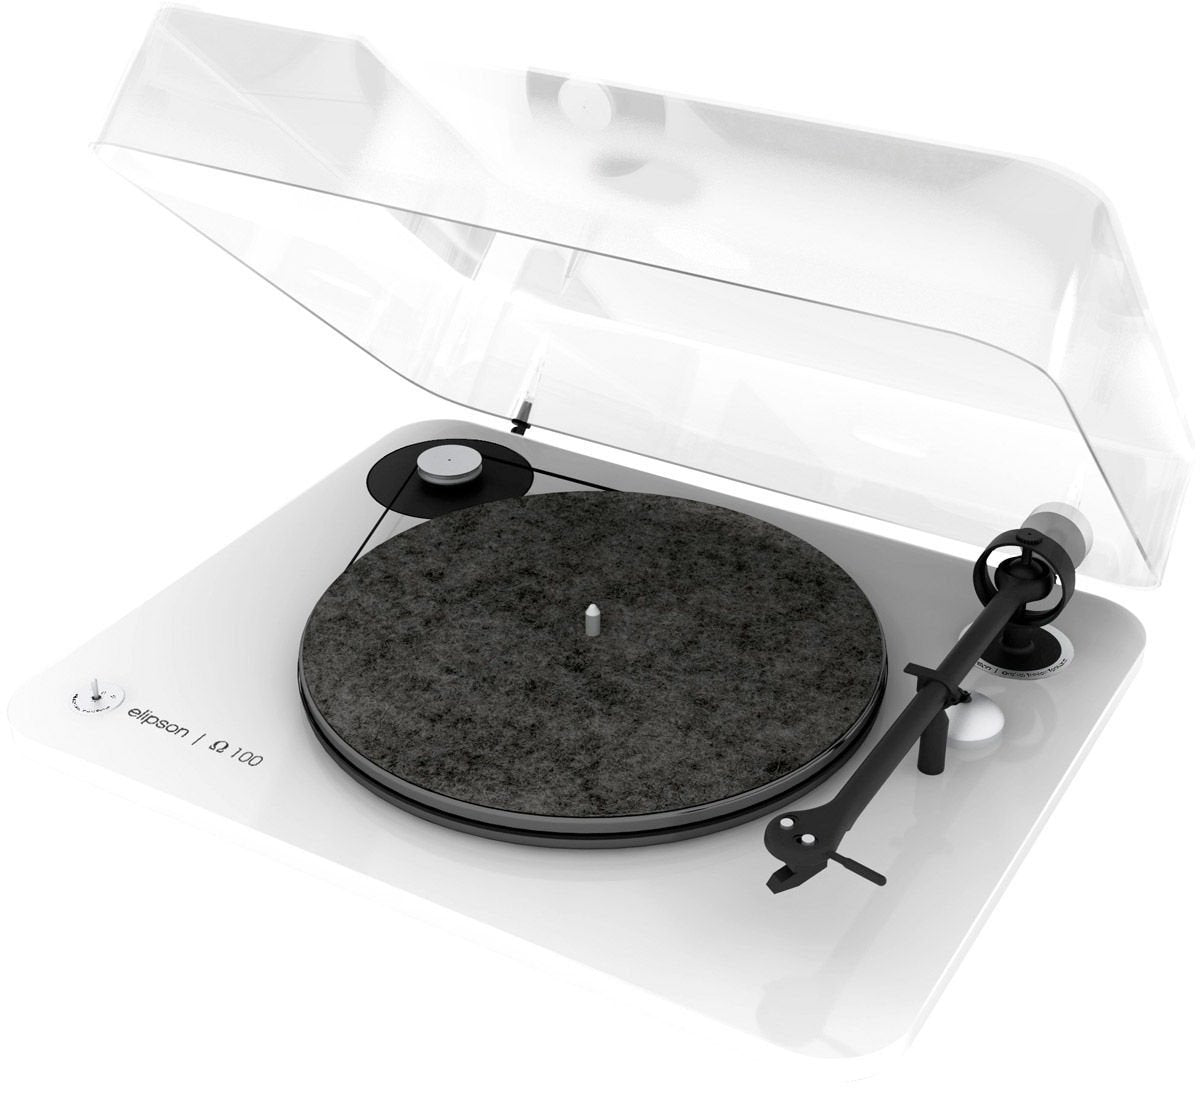 The Best Affordable Turntables: Part 1